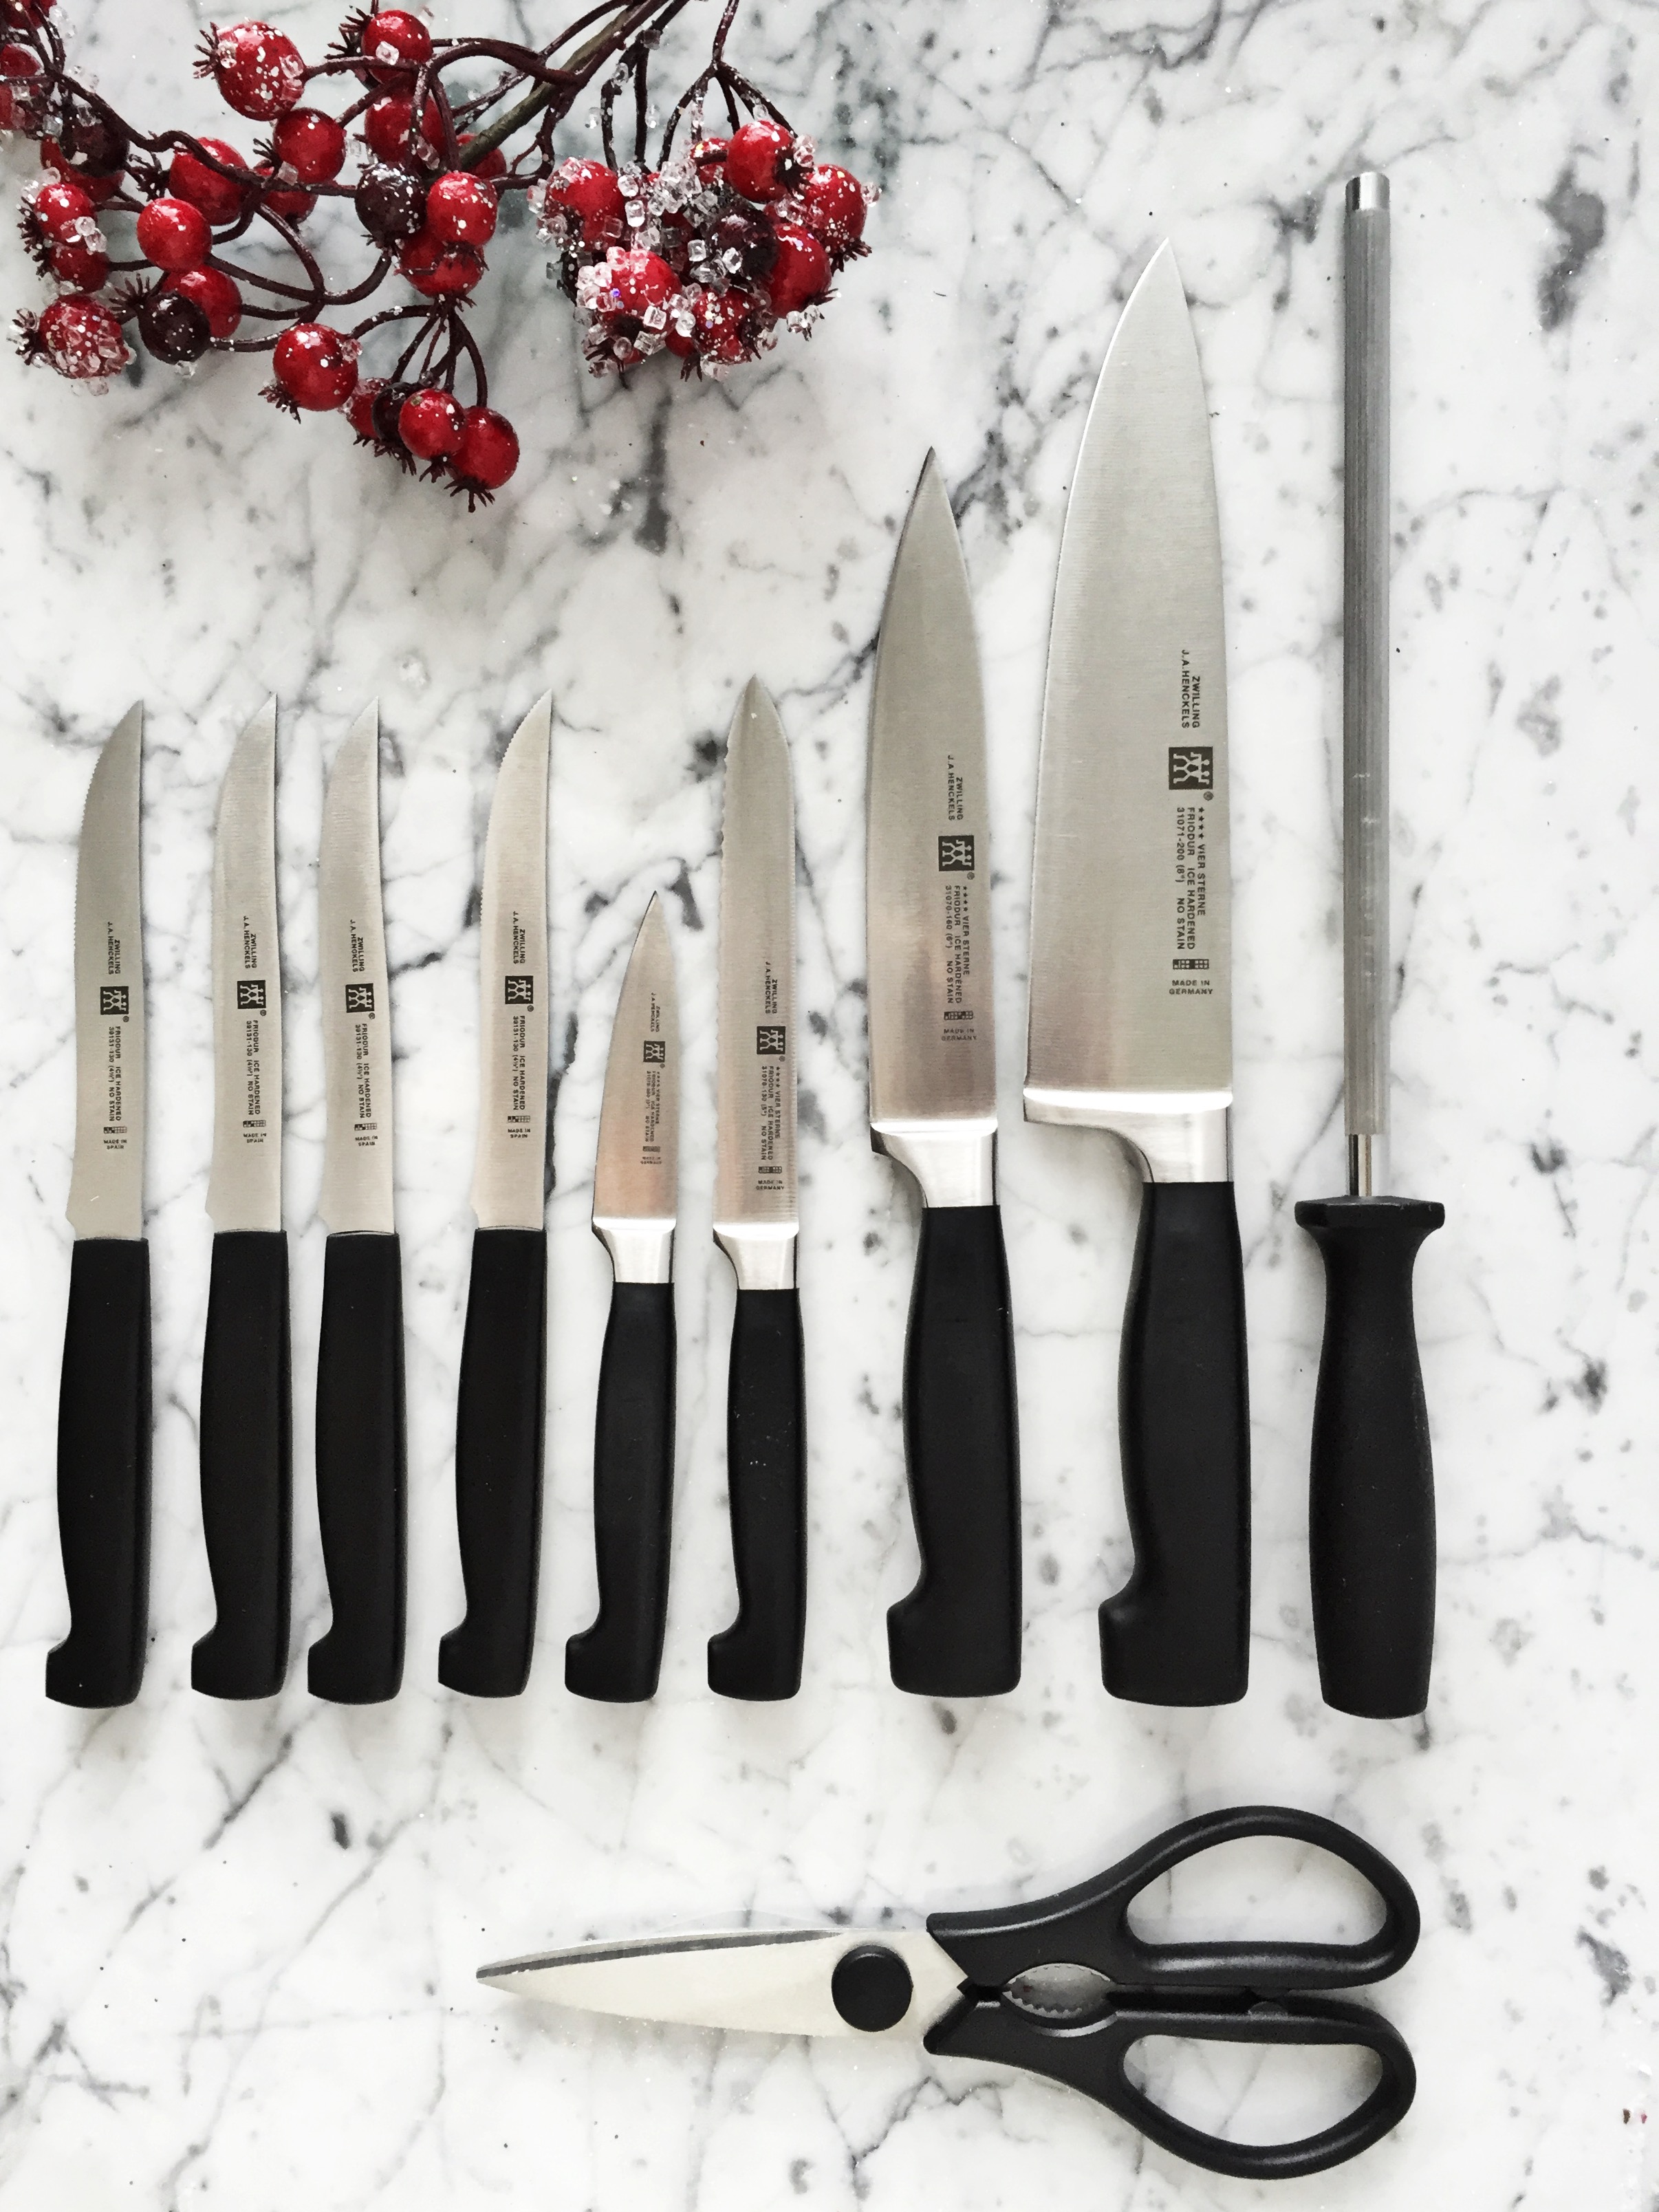 12 Days of Christmas: Zwilling Knives